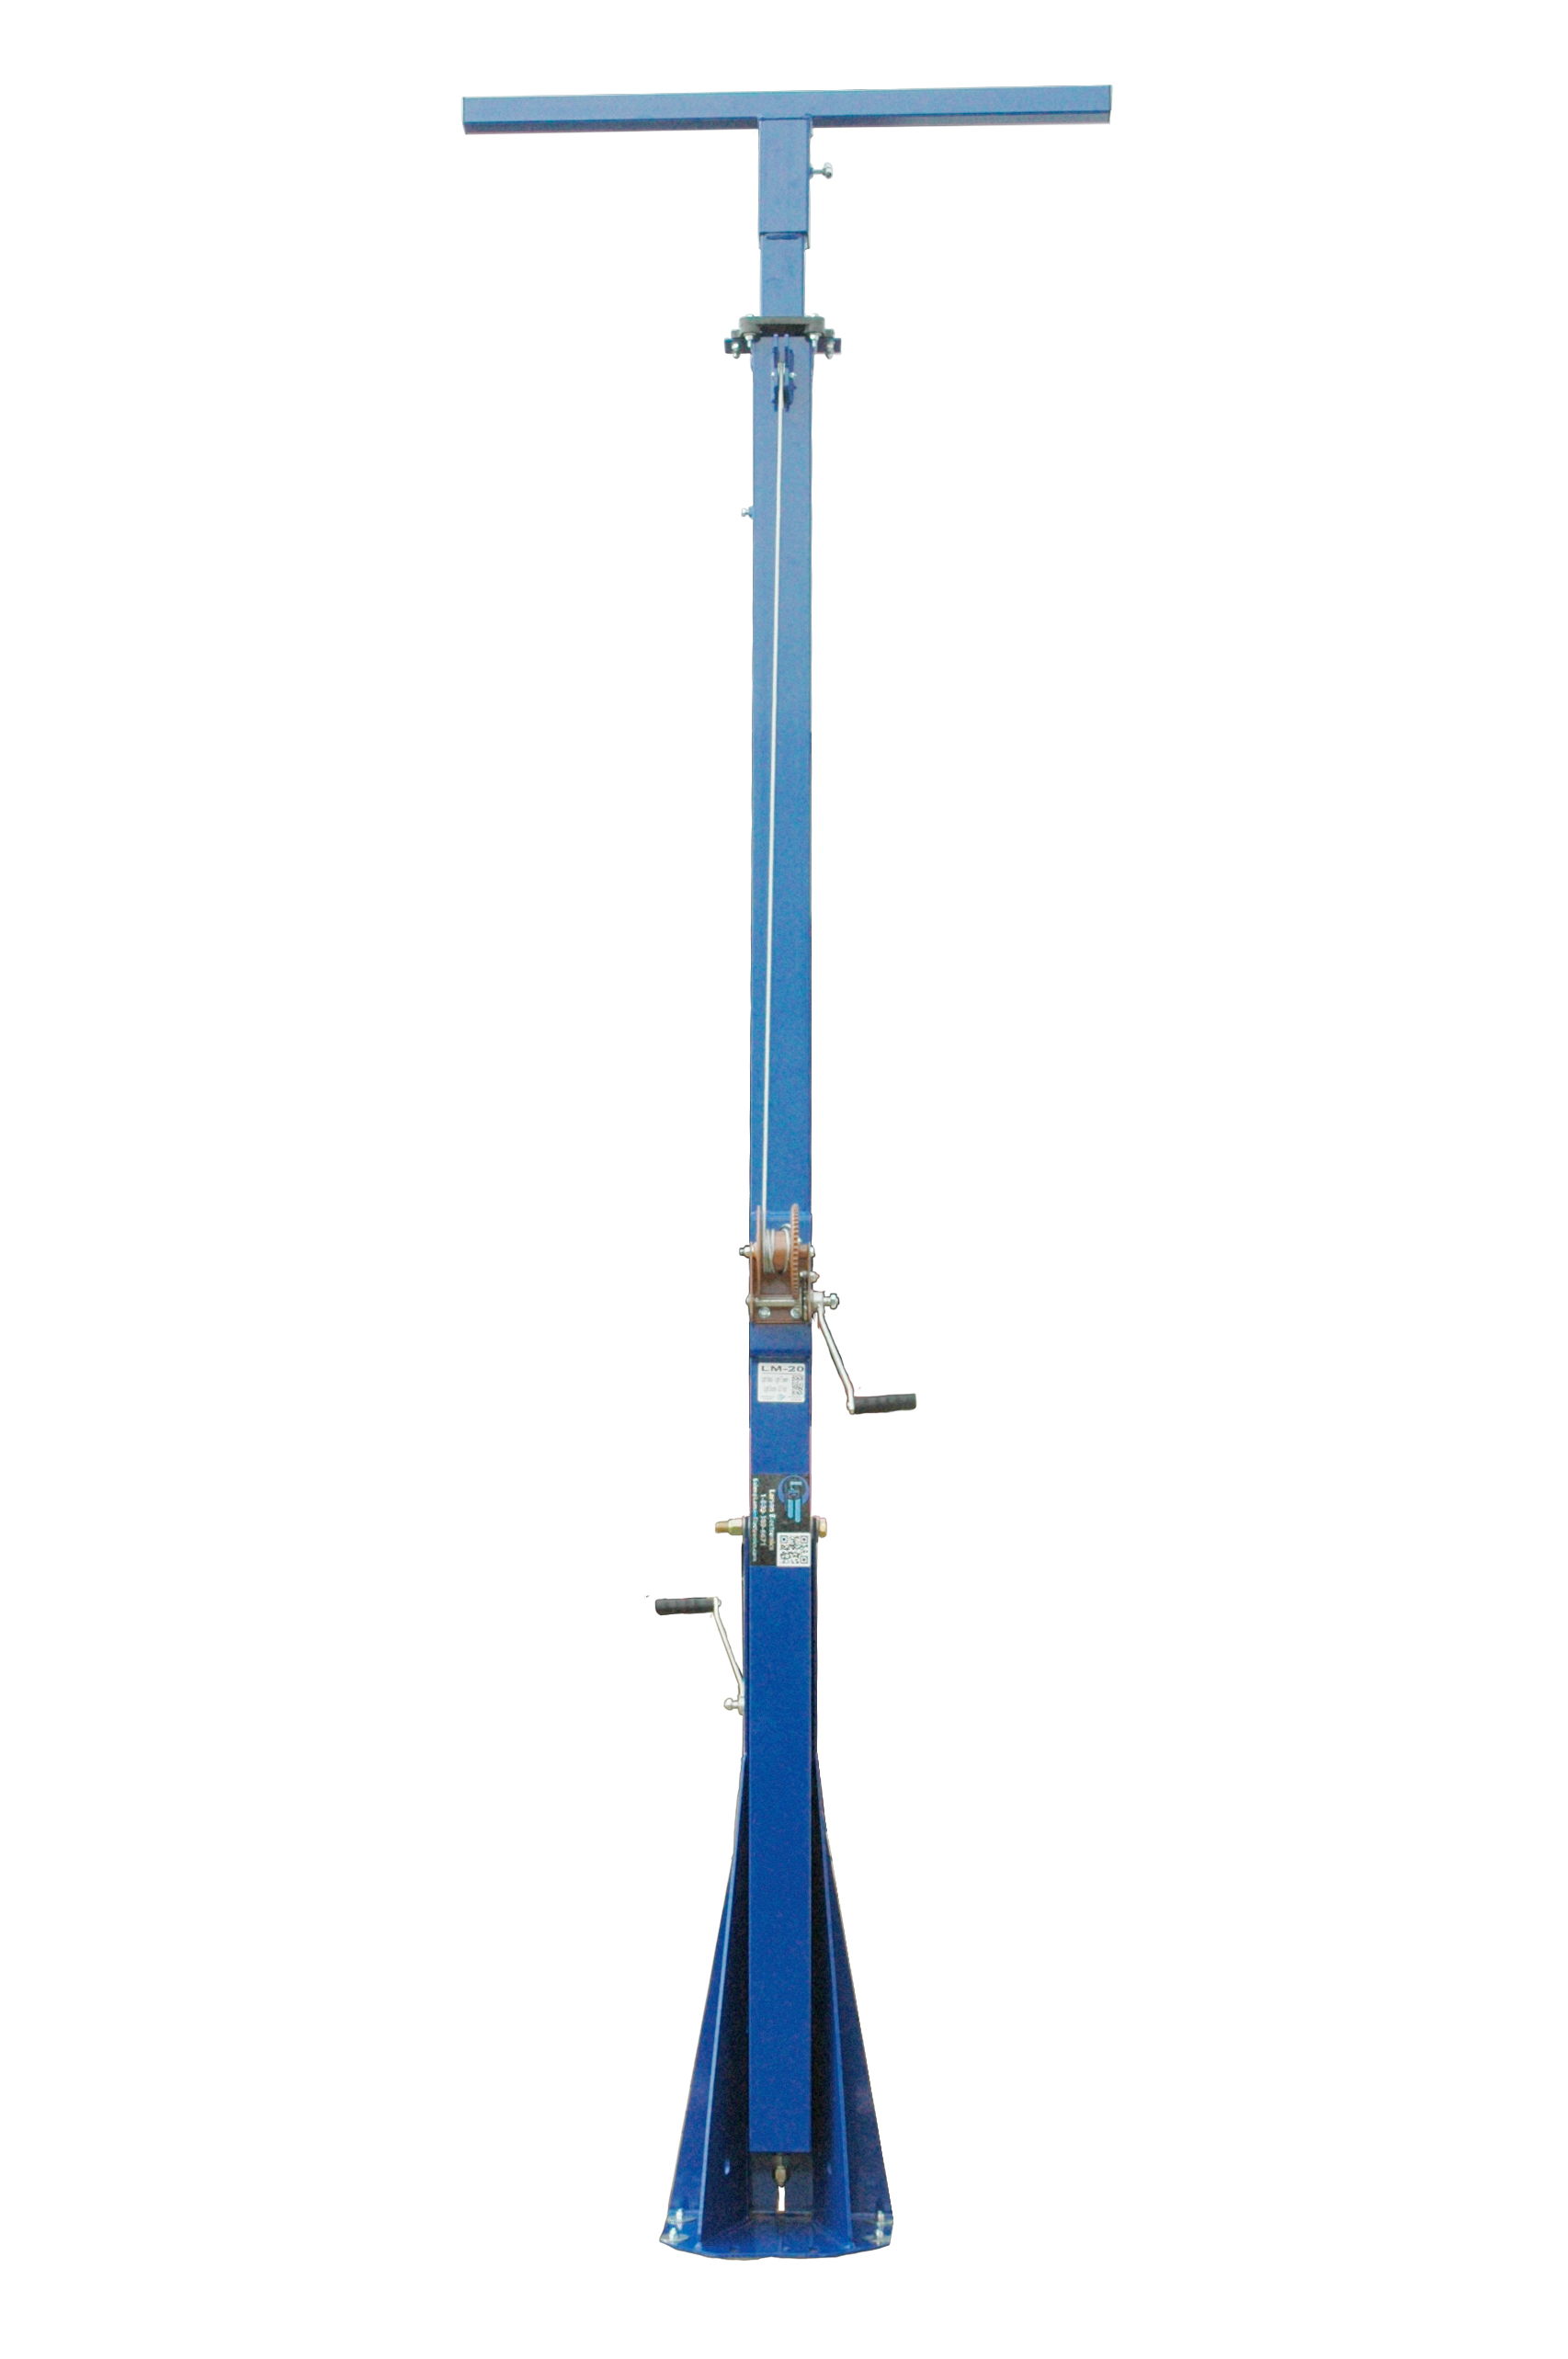 Telescoping Light Boom for lighting, cameras and other electrical equipment